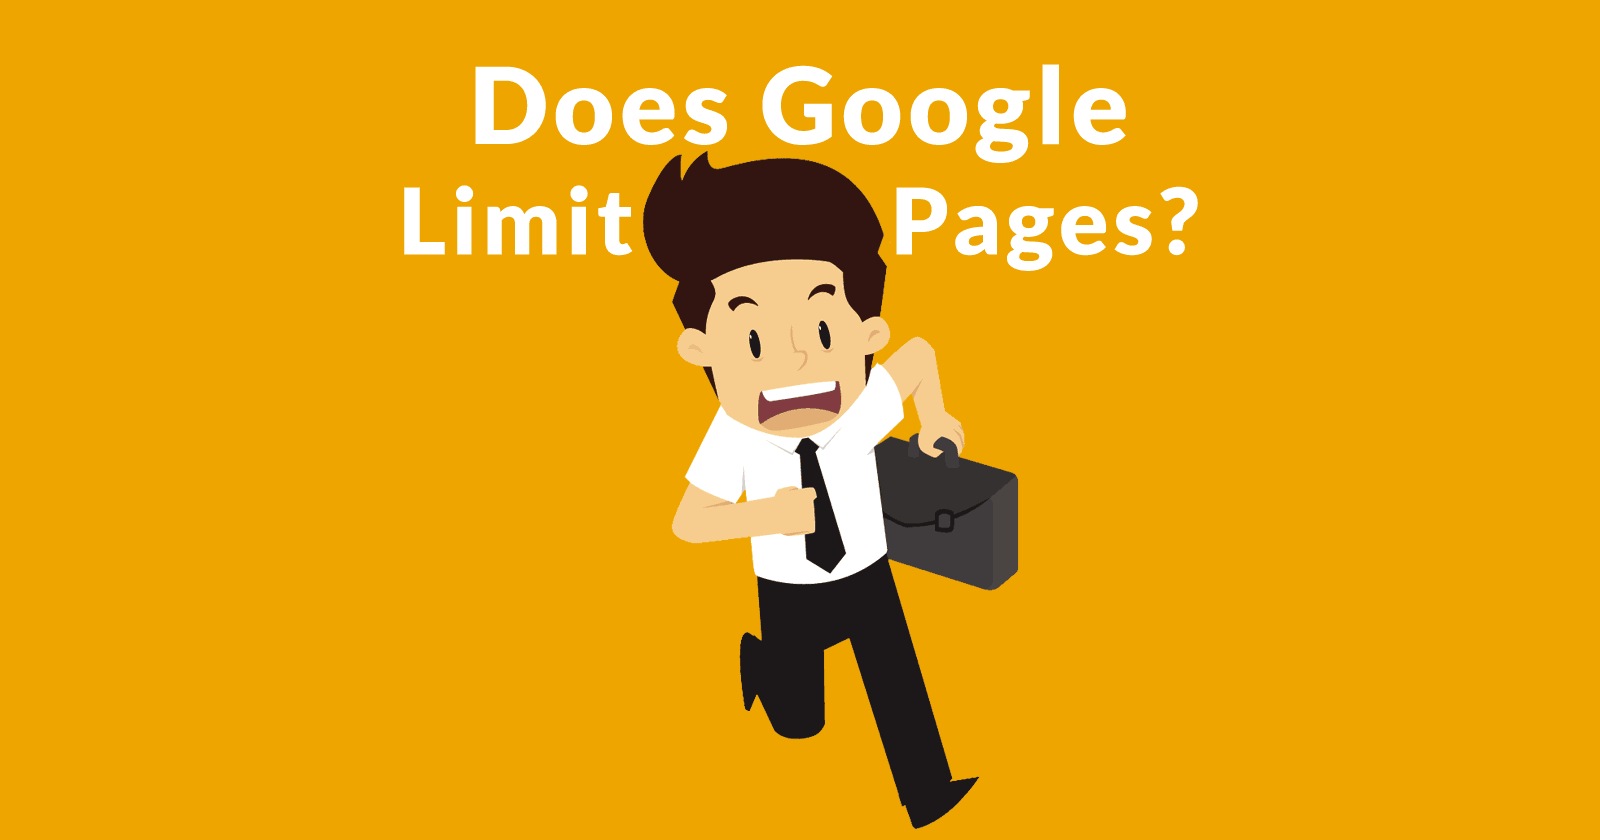 An image of a business person running, a metaphor of an SEO in a rush to rank a new page. The words "Does Google Limit Pages?" is superimposed.